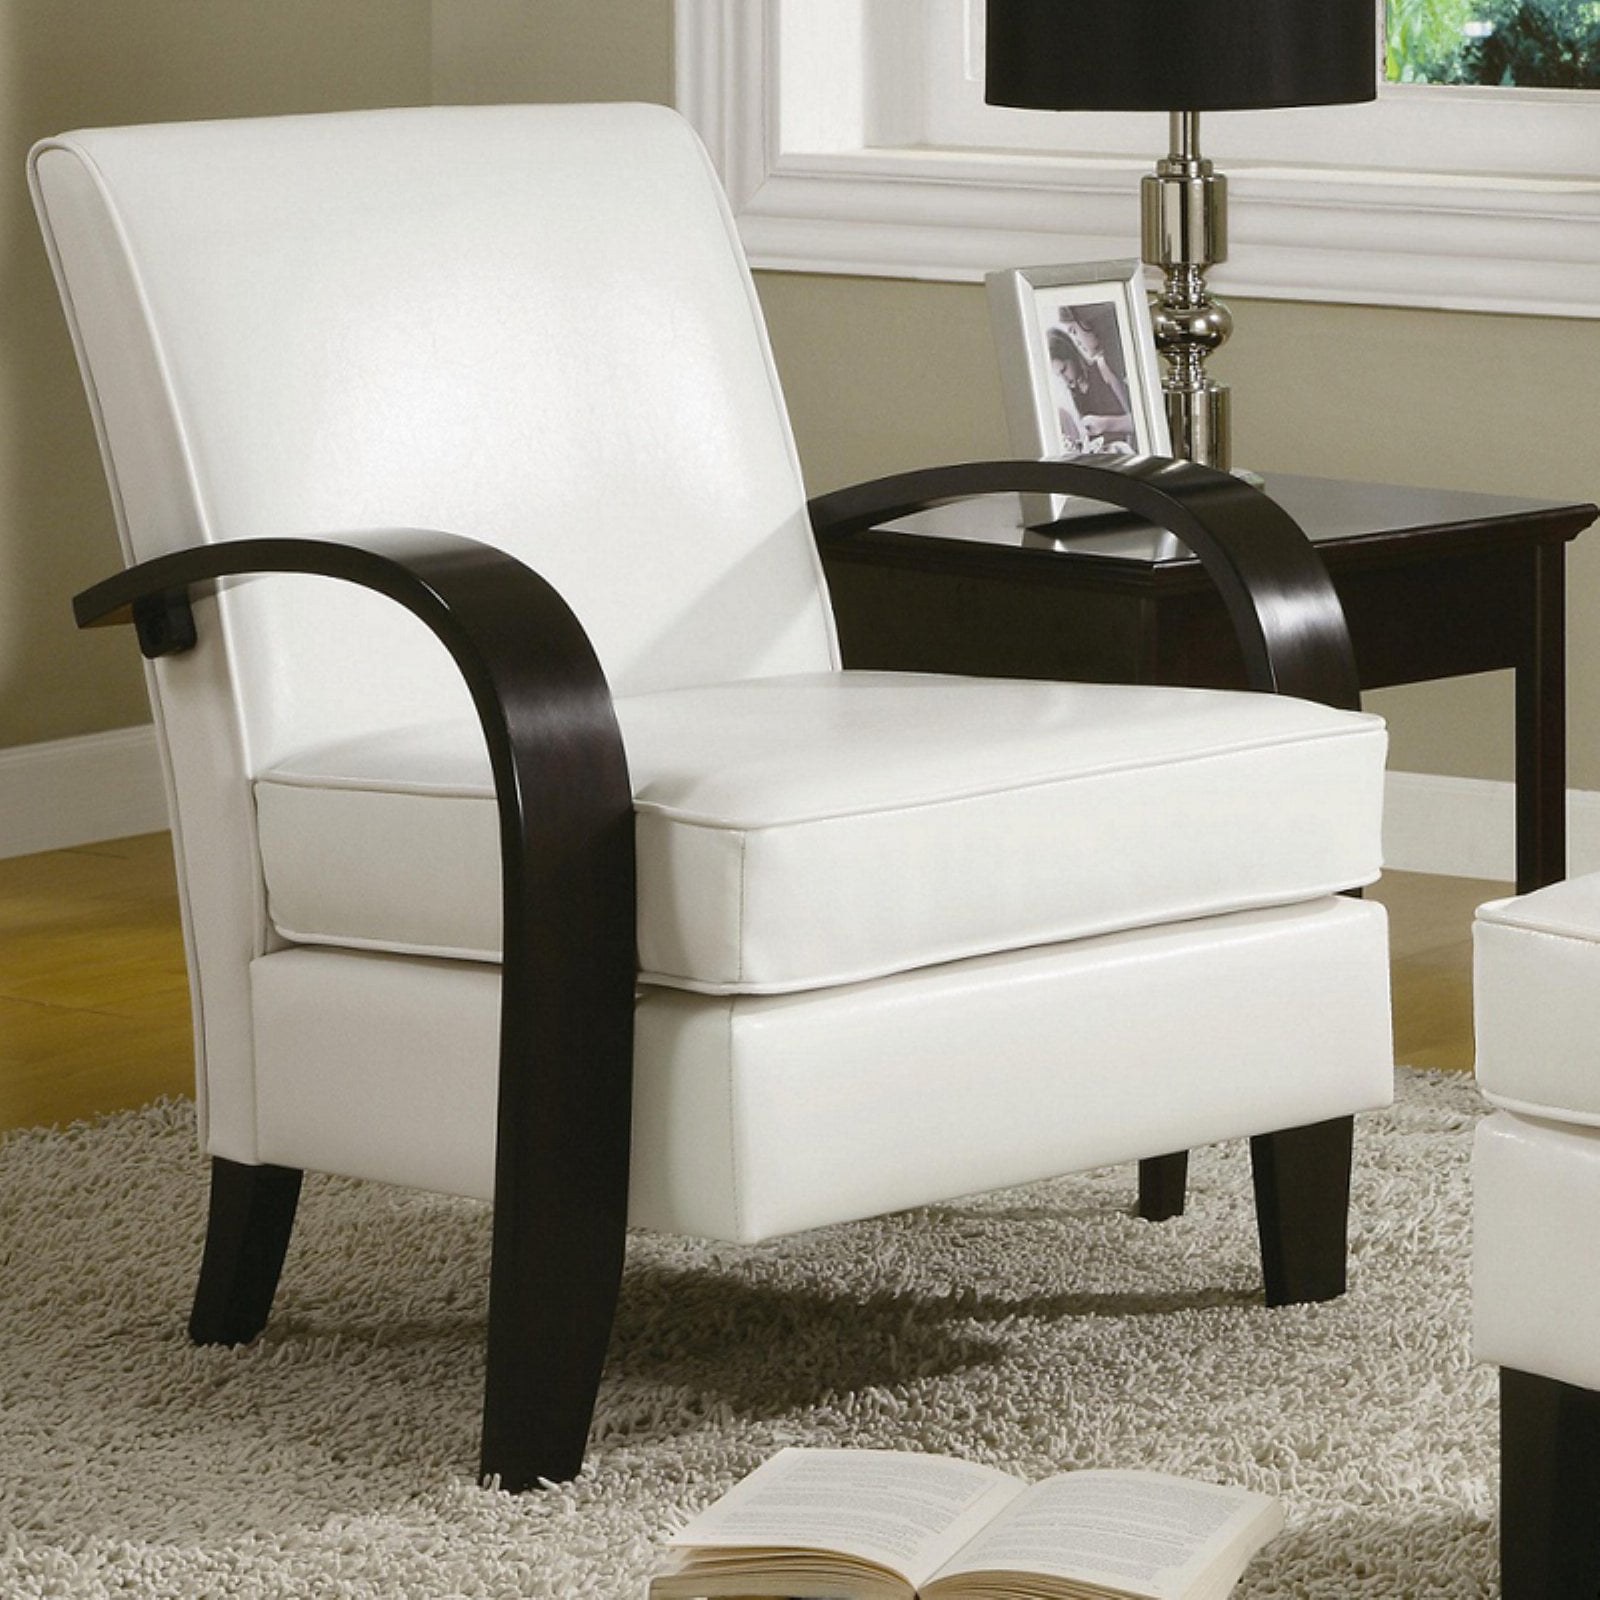 Roundhill Wonda Bonded Leather Accent Arm Chair with Ottoman, Multiple